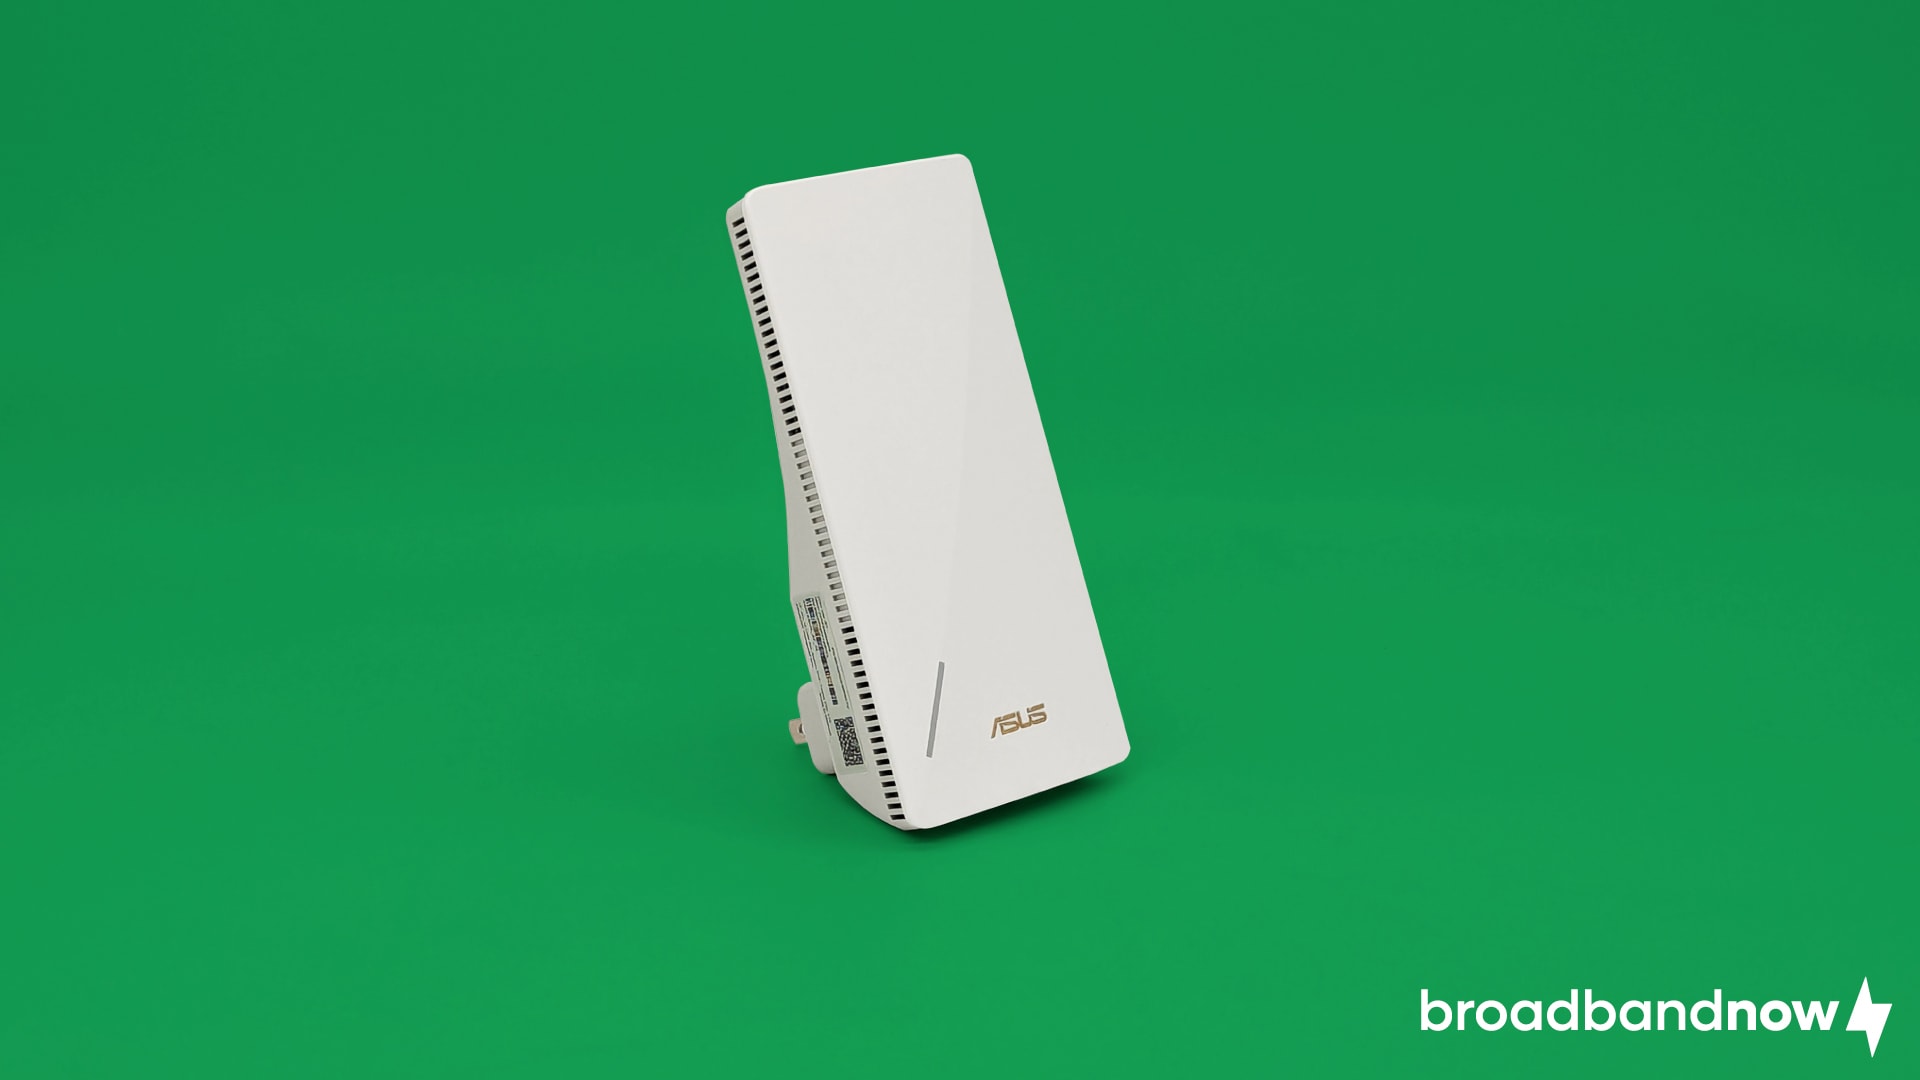 Asus RP-AX58 Wi-Fi extender on a green background